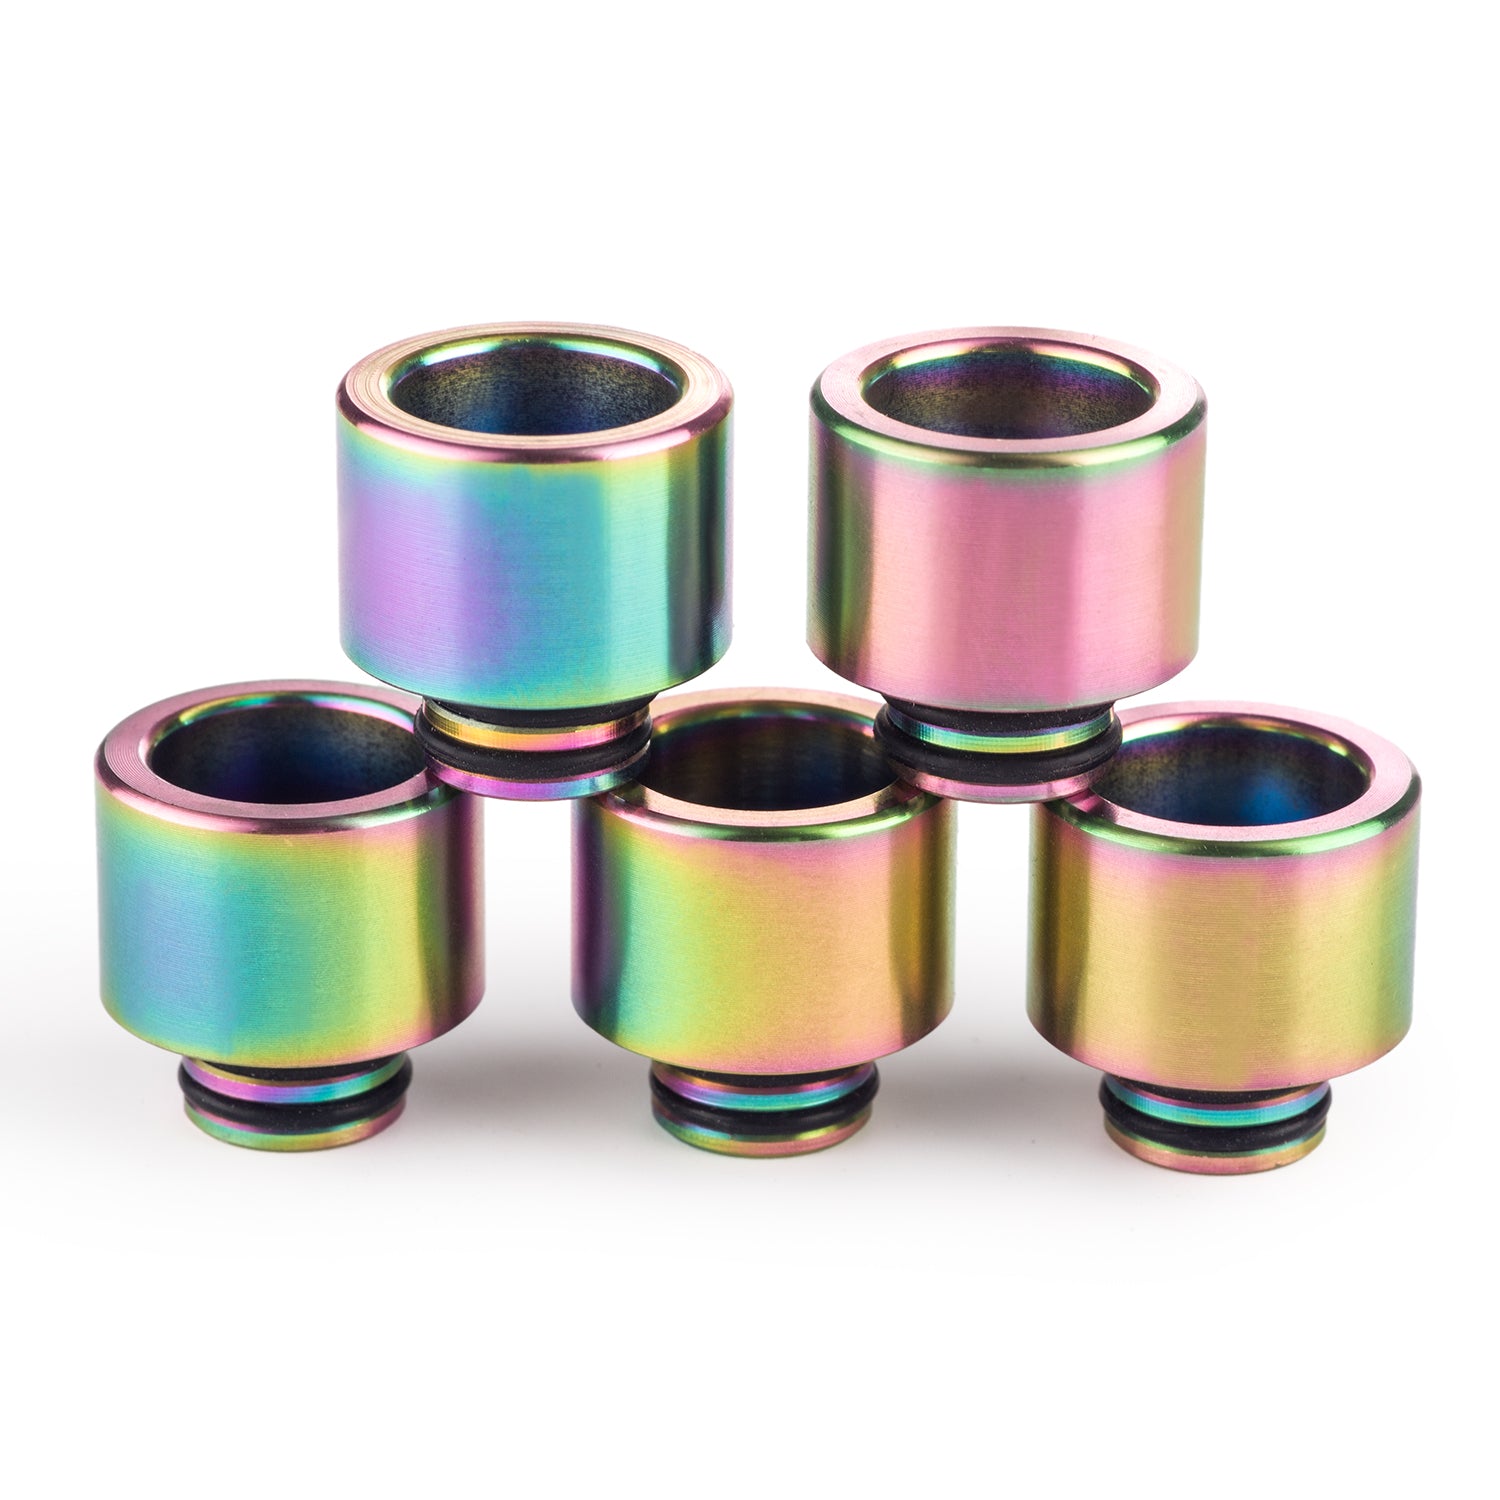 AS903 Stainless 510 Drip Tip Mouthpiece 1pc Pack